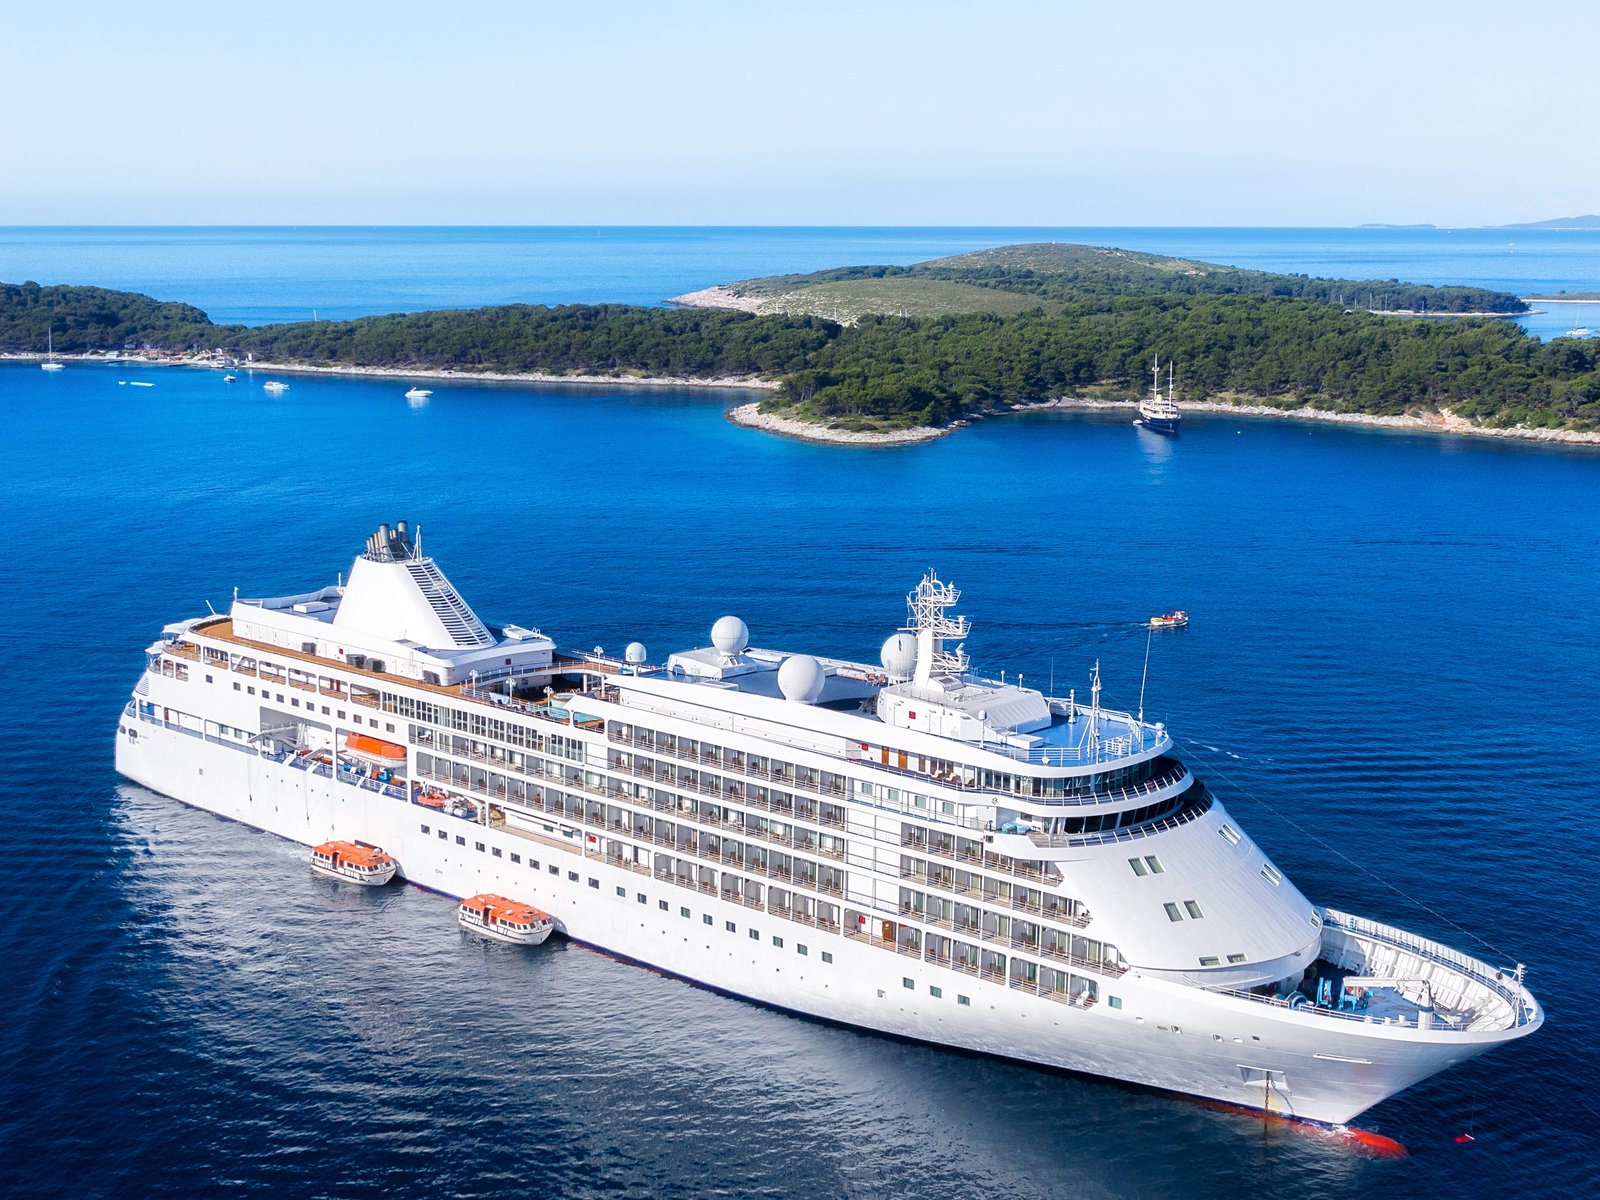 Major Cruise Lines Plan to Resume in 2021